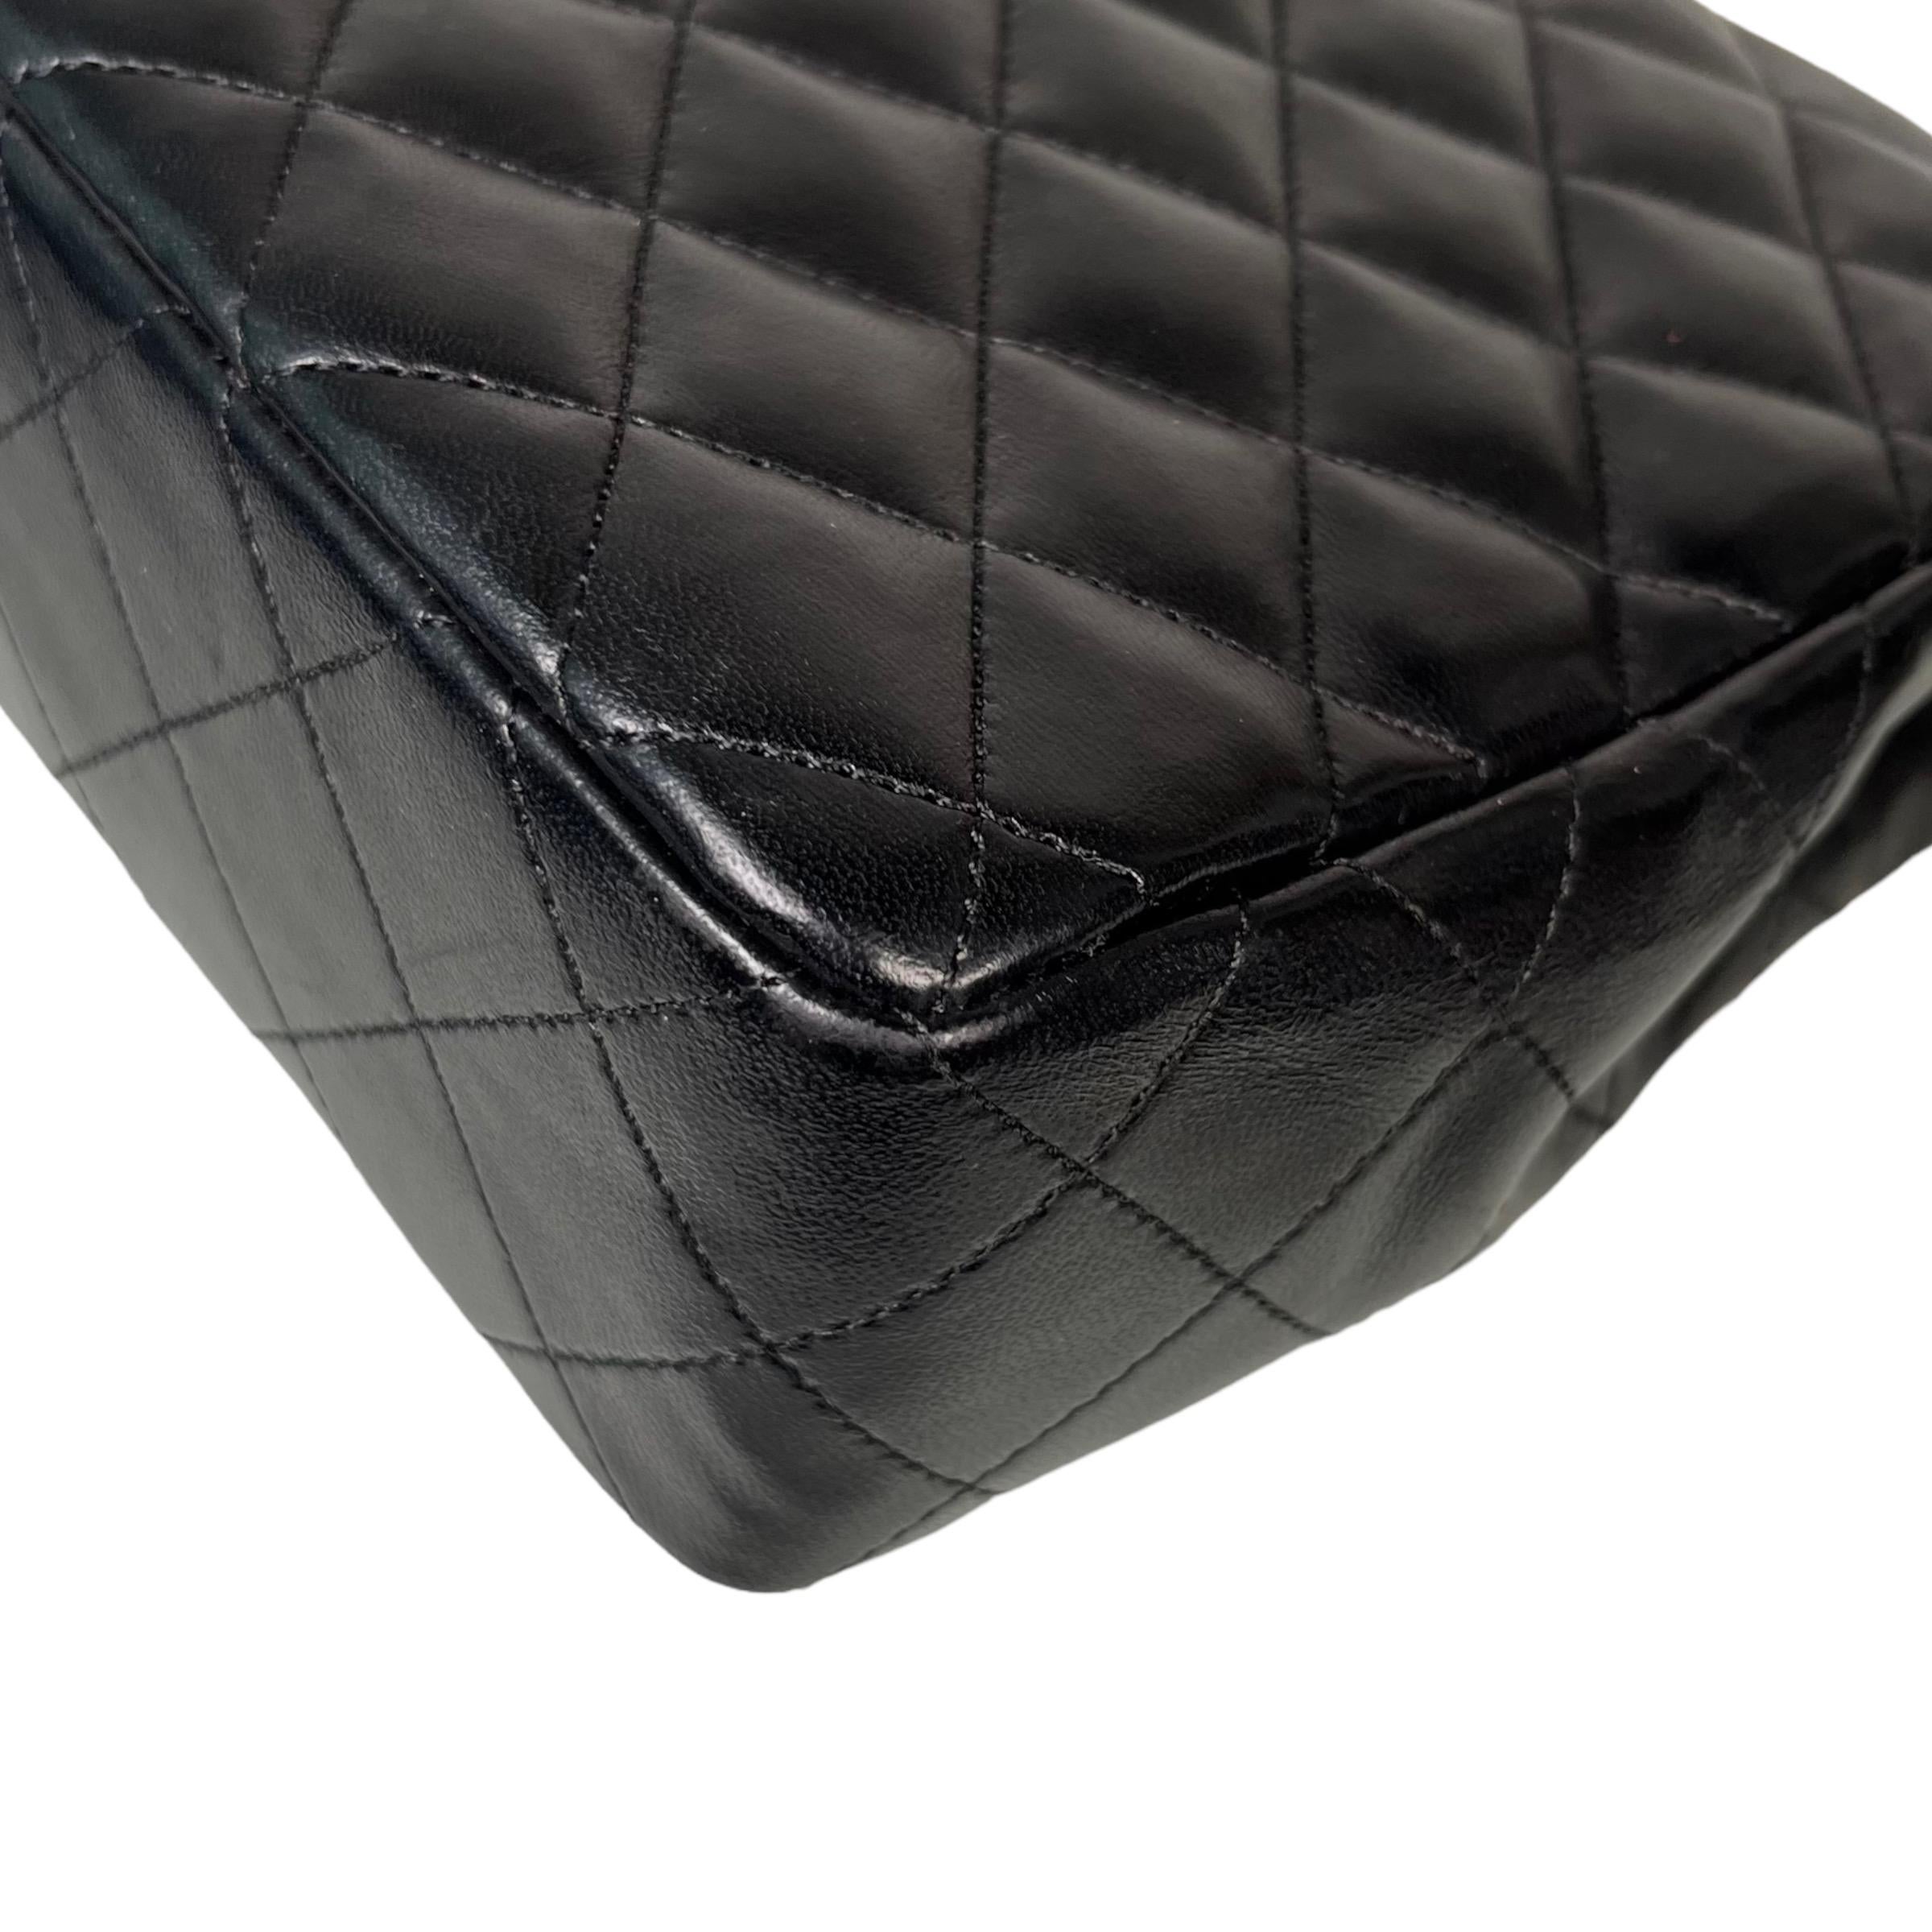 CHANEL Lambskin Quilted Envelope Flap Bag 1